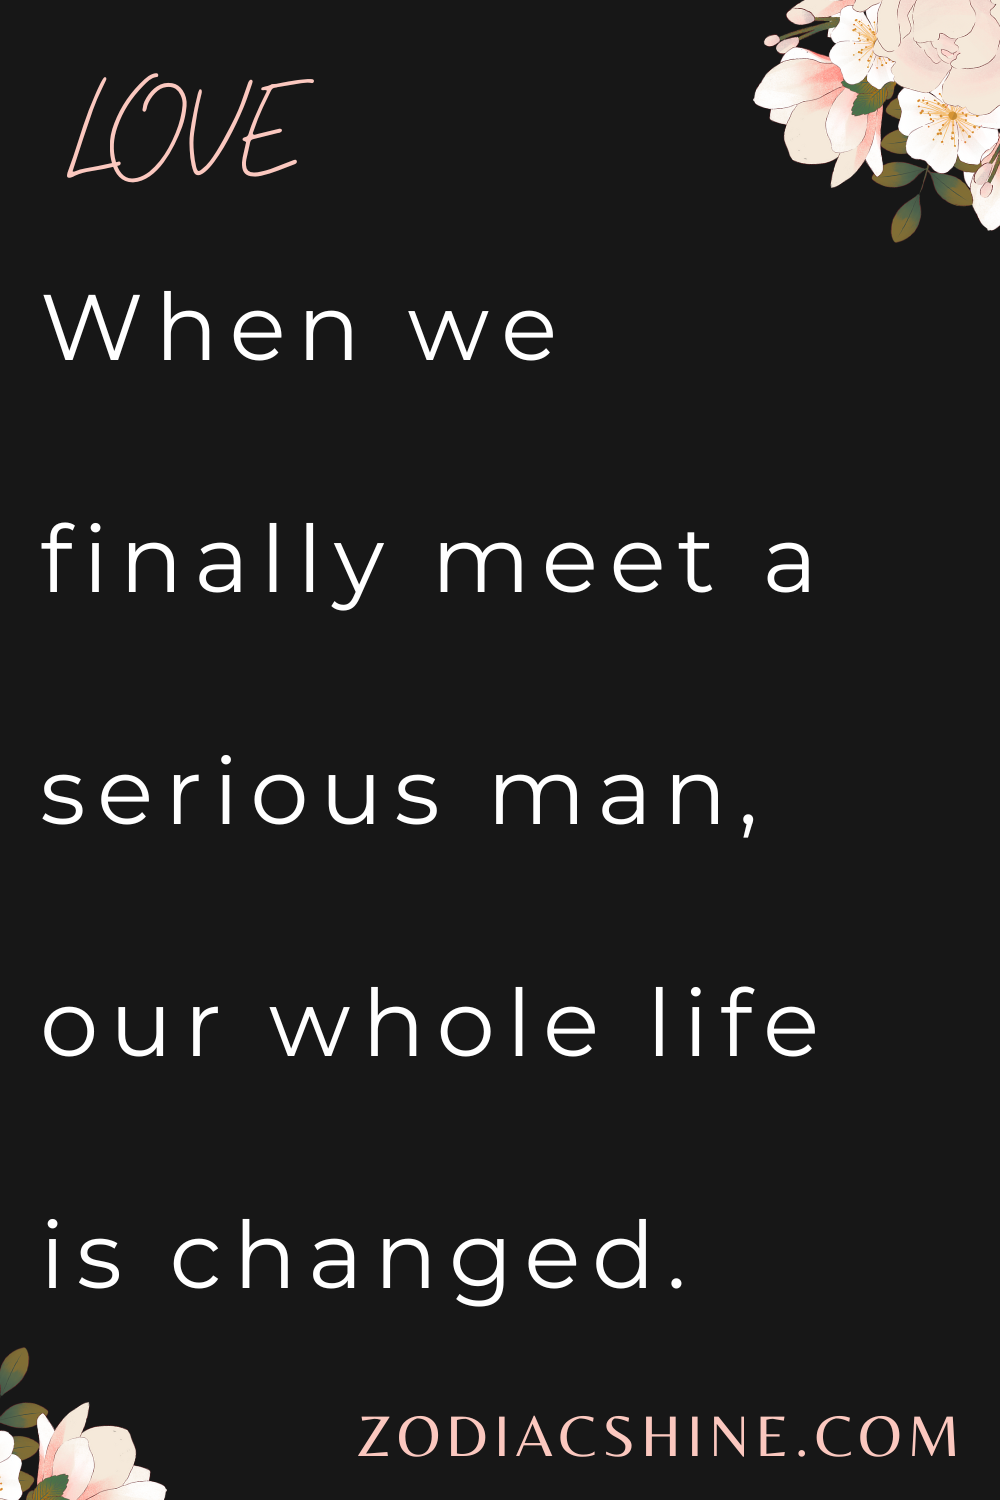 When we finally meet a serious man, our whole life is changed.